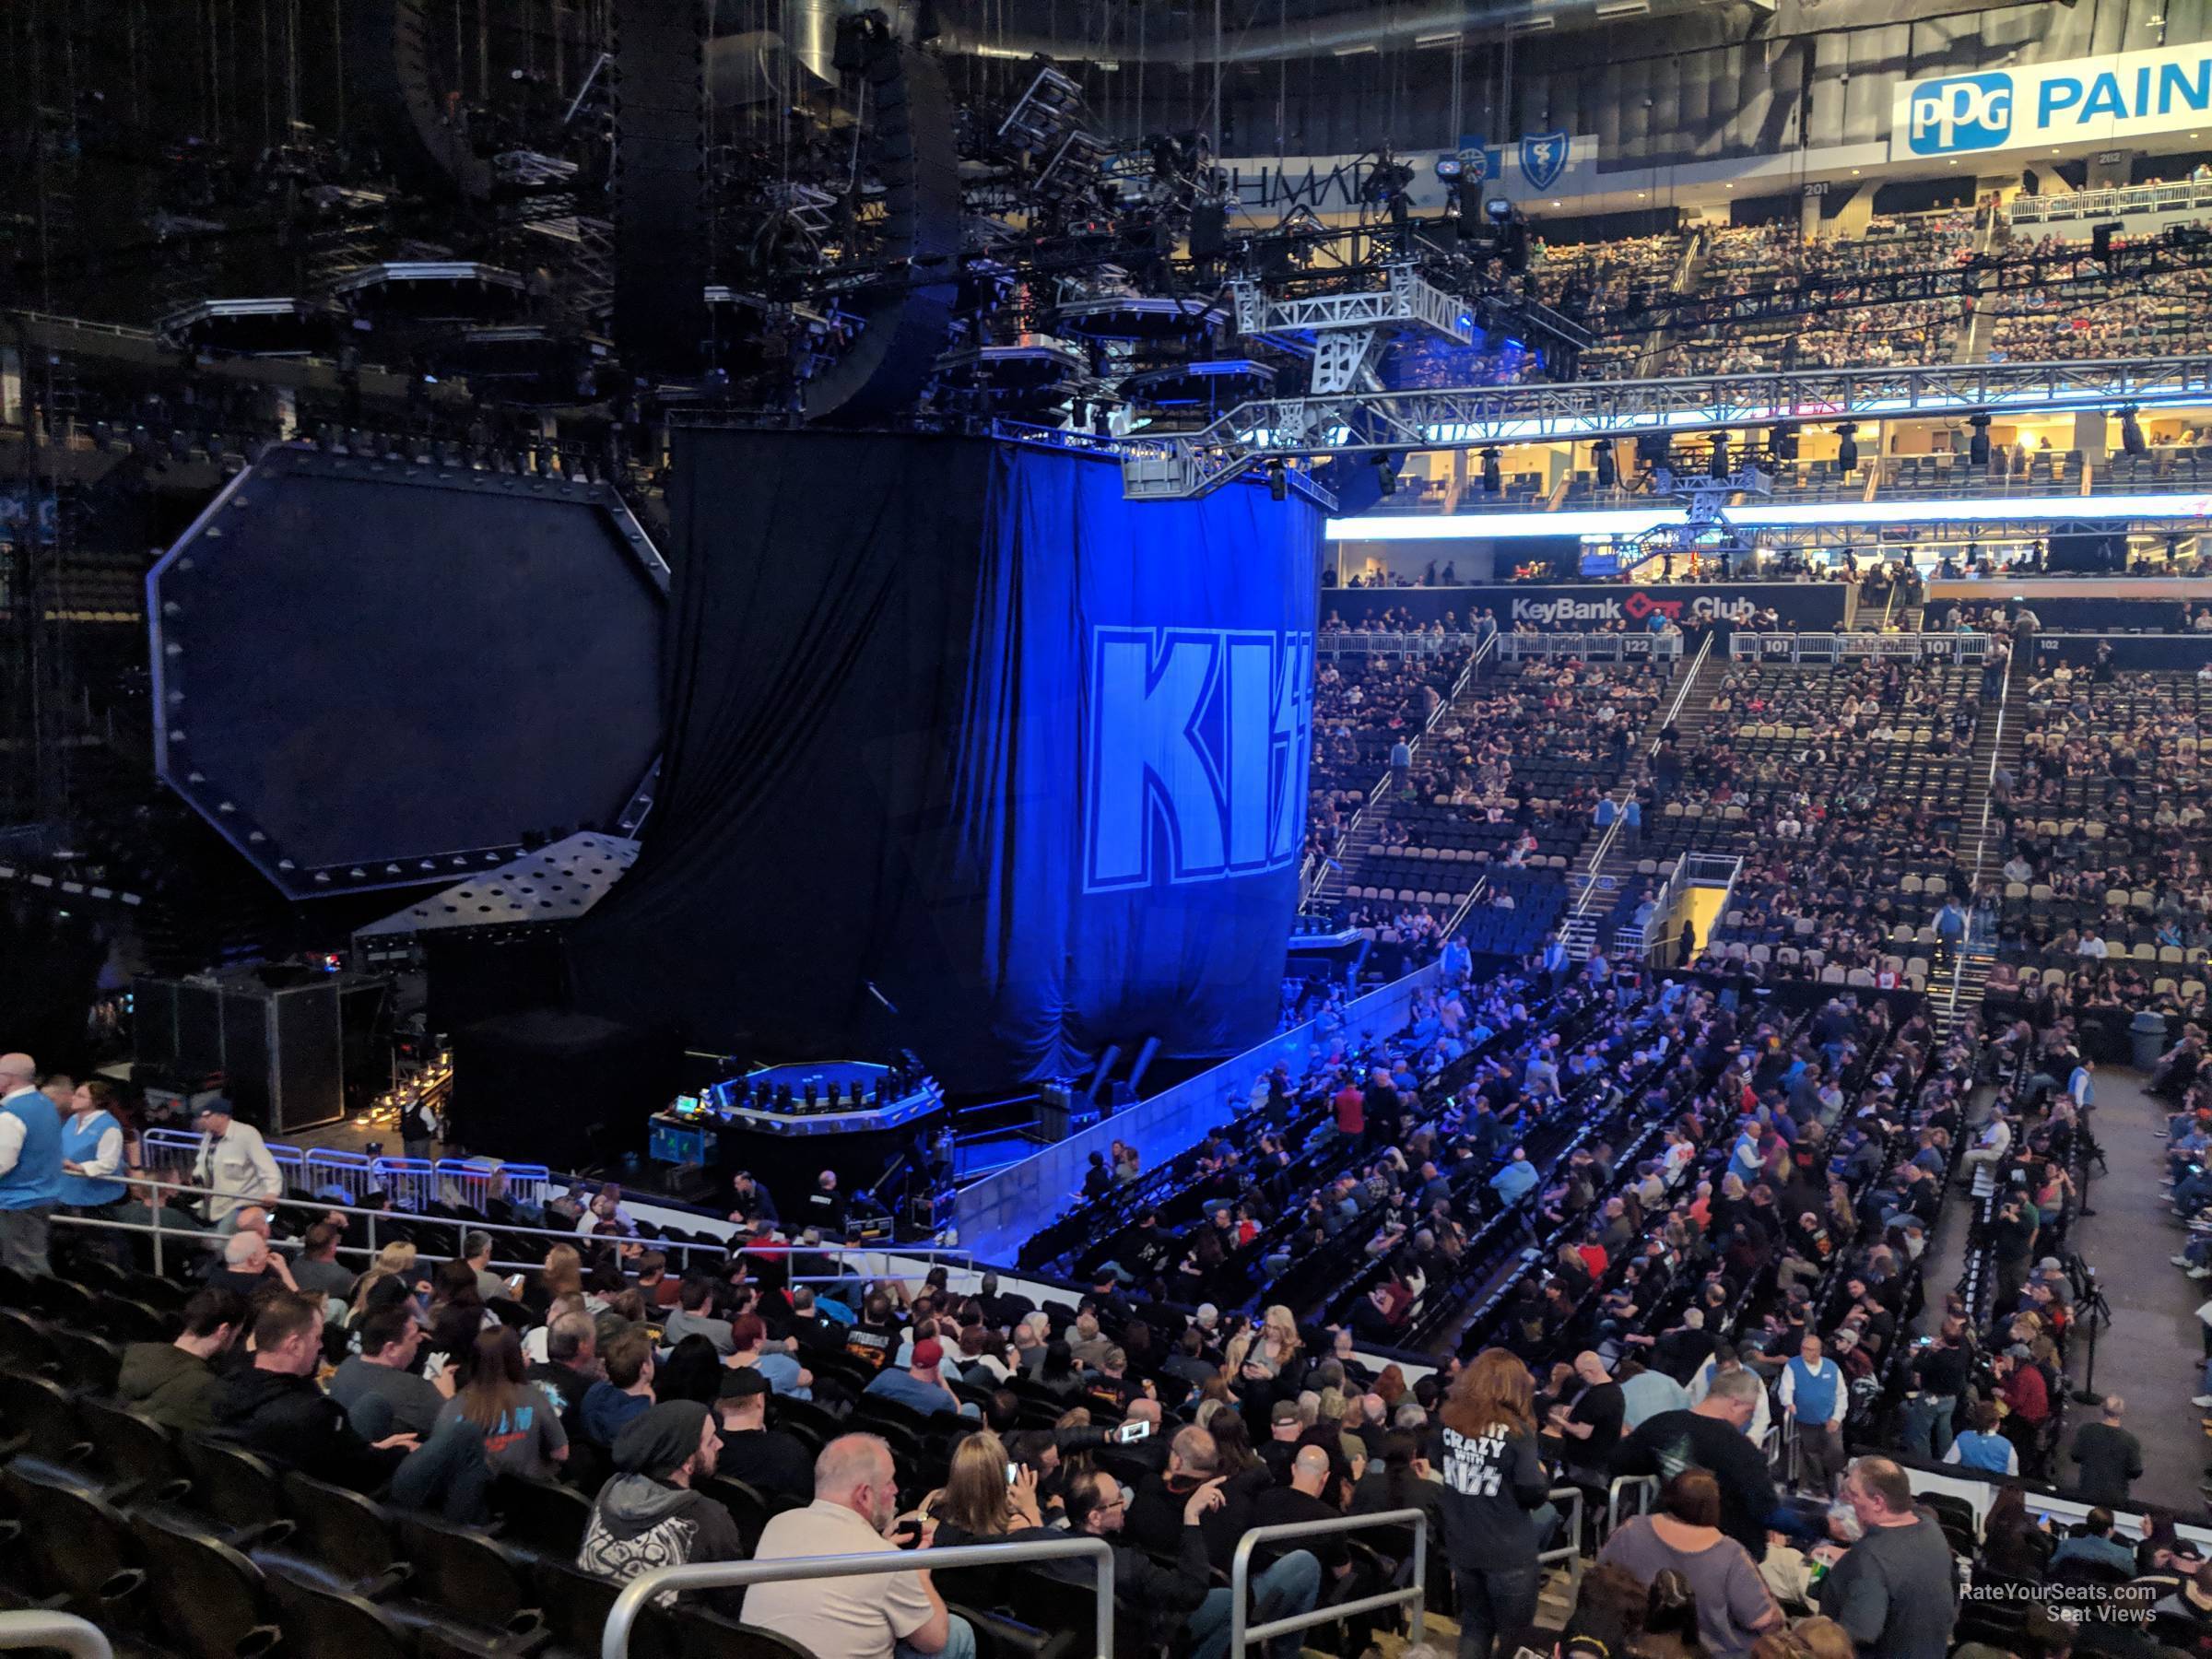 Section 112 at PPG Paints Arena for Concerts